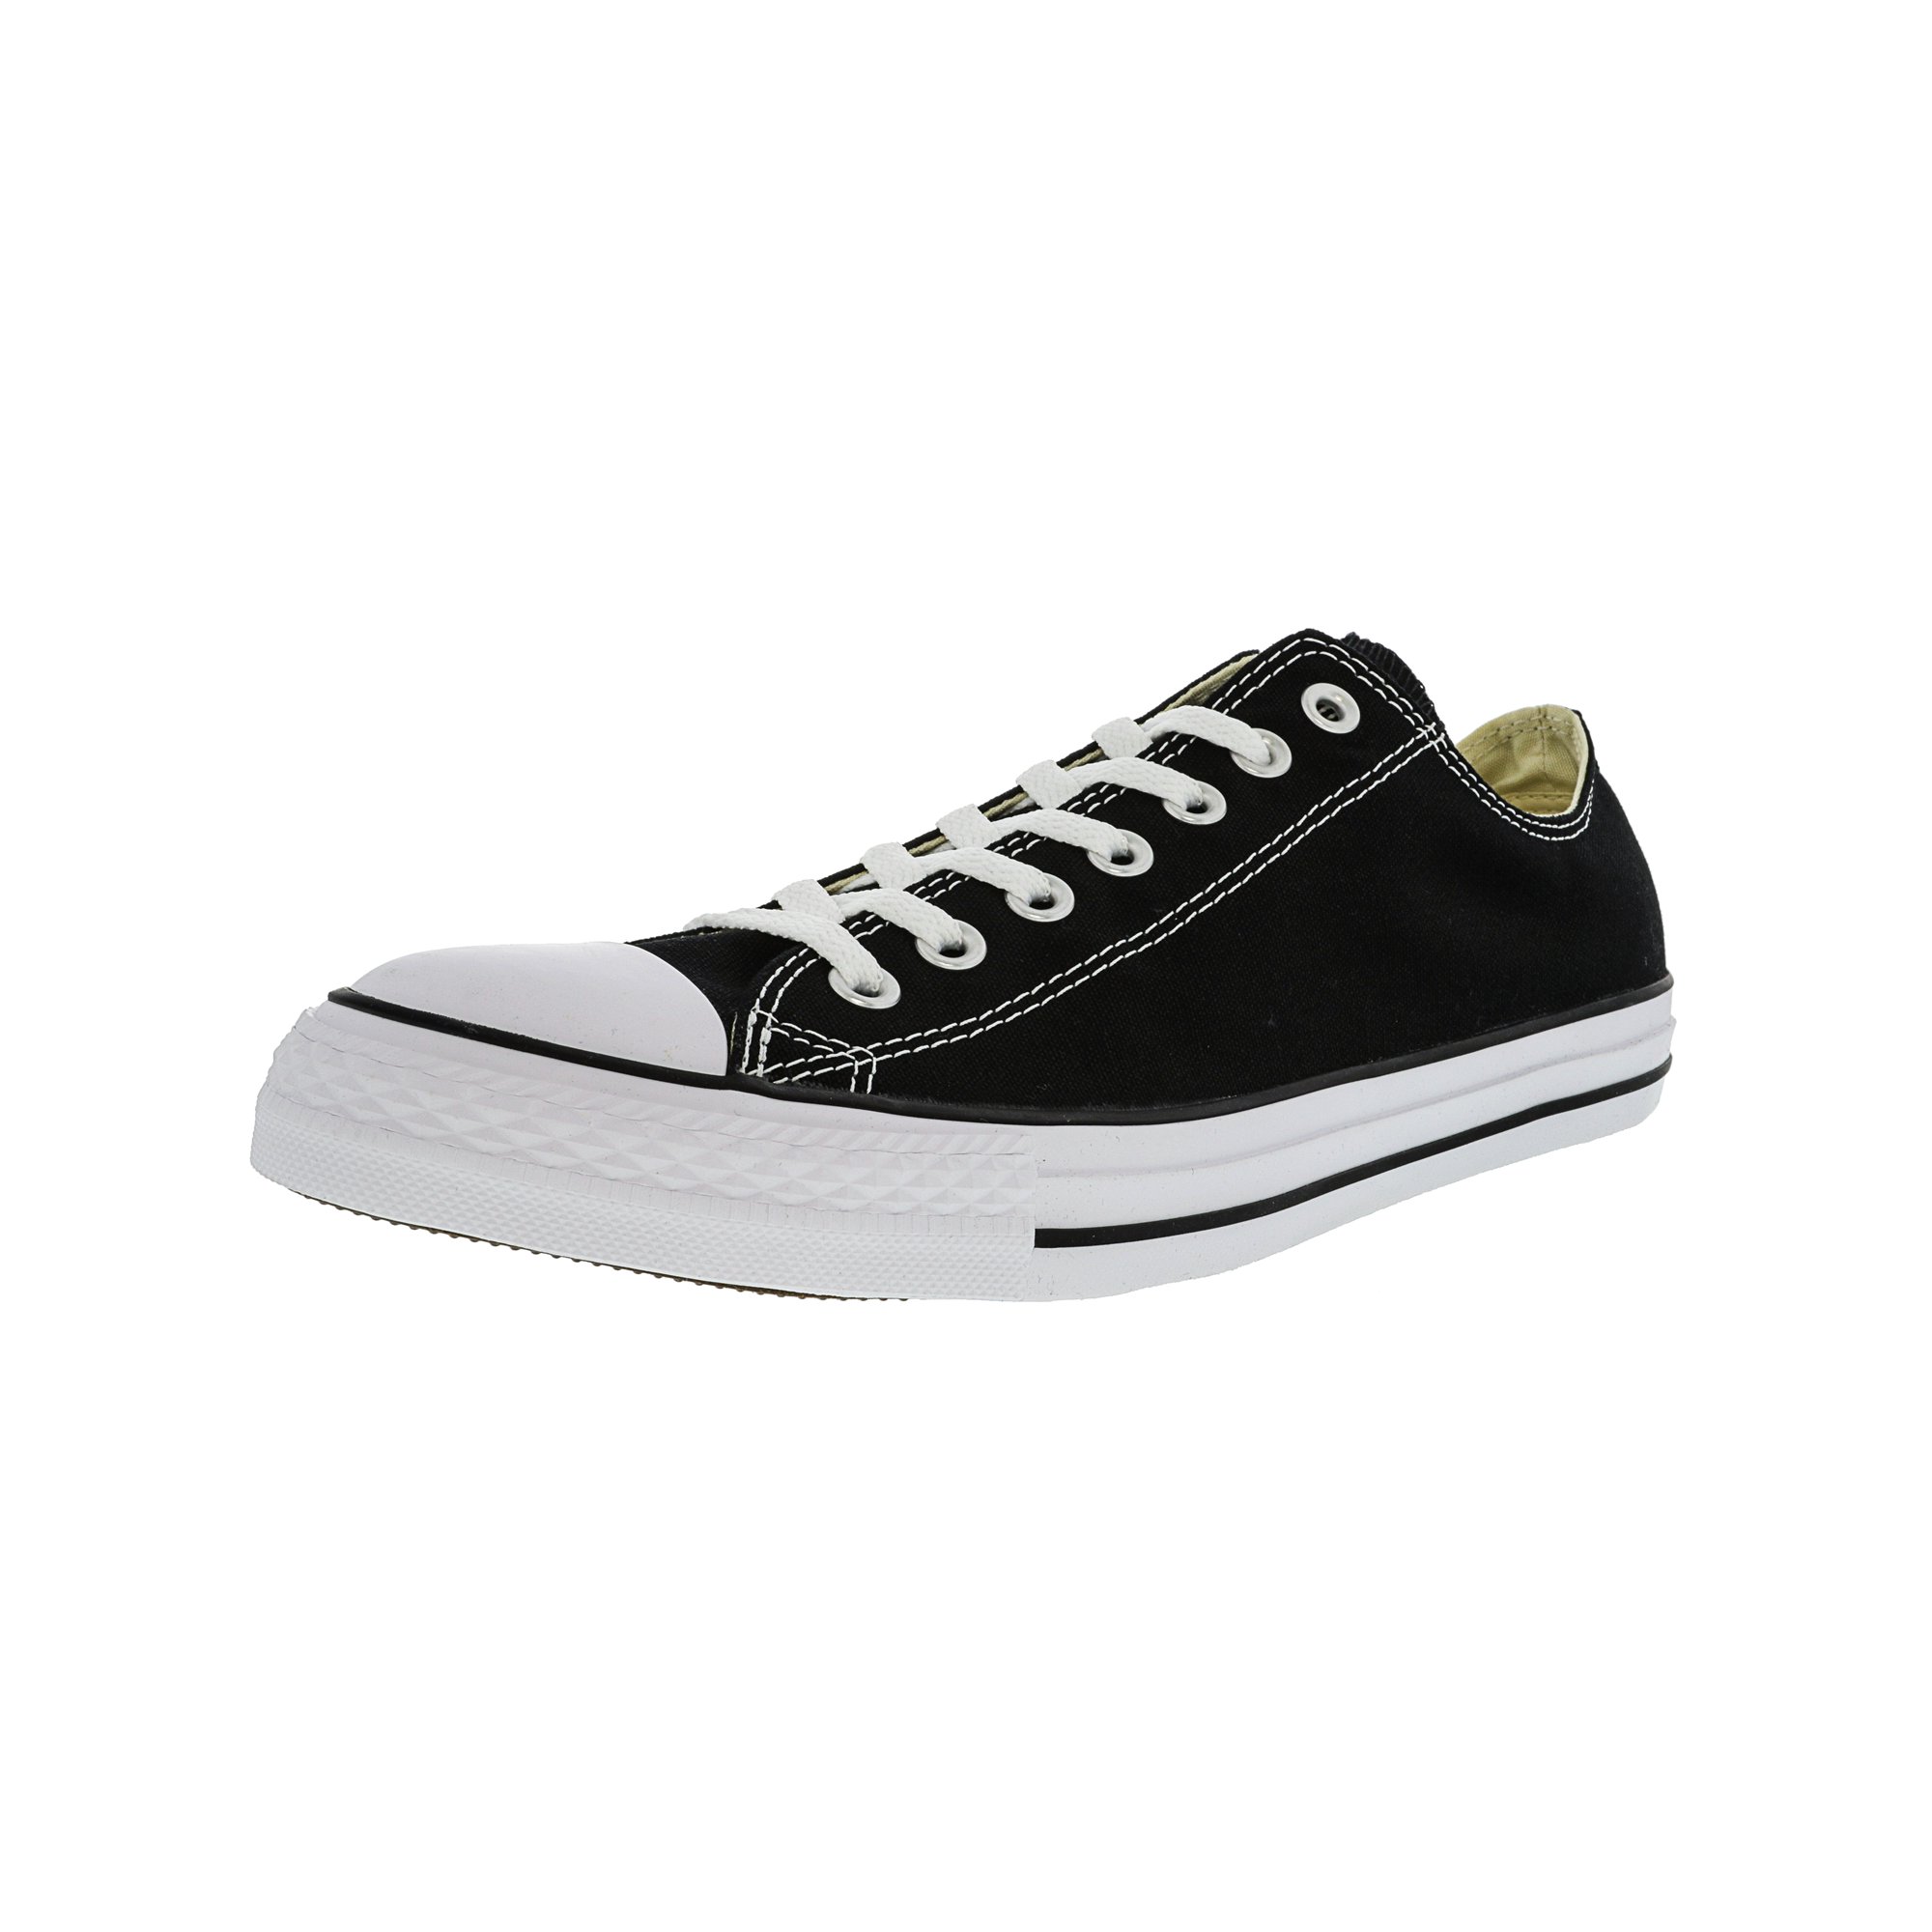 Converse All Star Ox Black Ankle-High Fashion Sneaker -